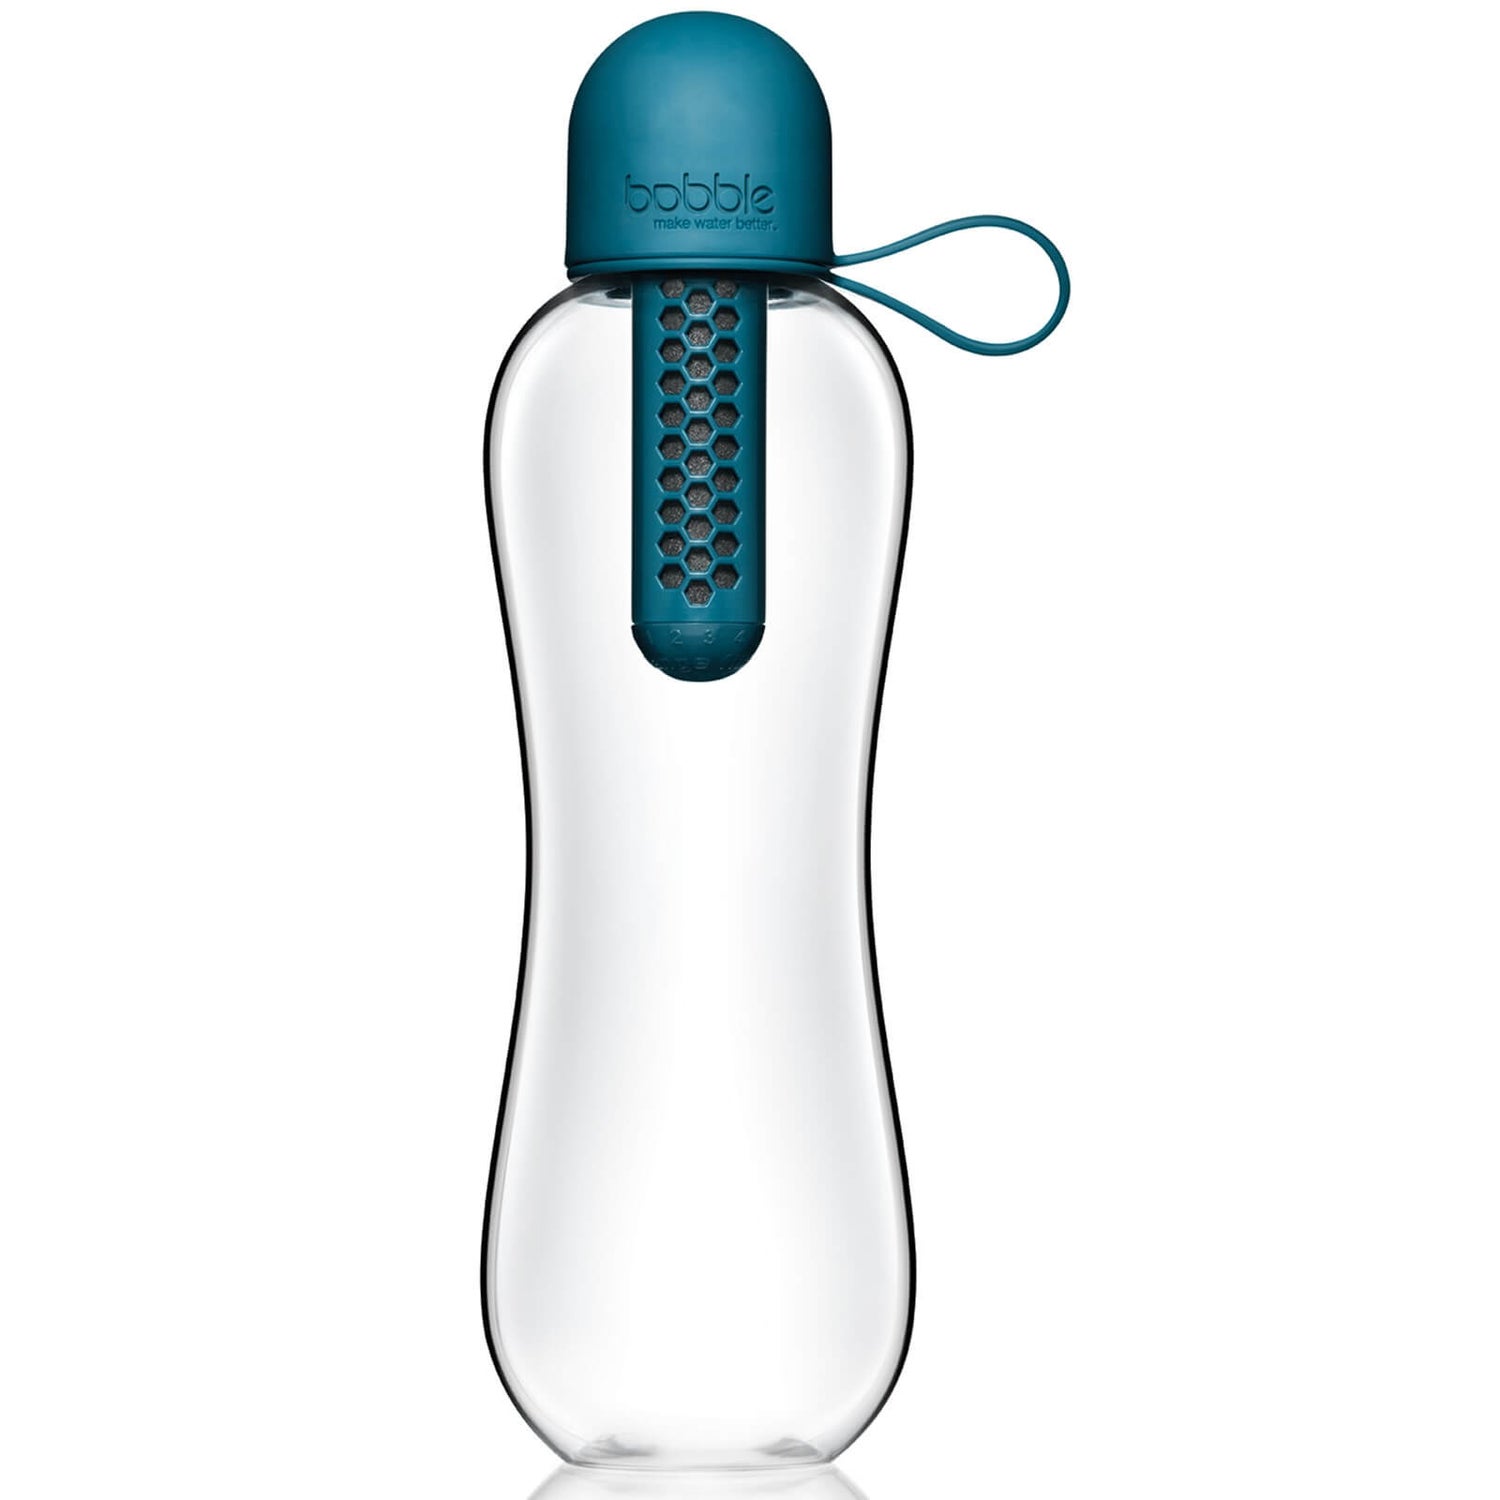 bobble Infuse Filtered Water Bottle 590ml - Peacock